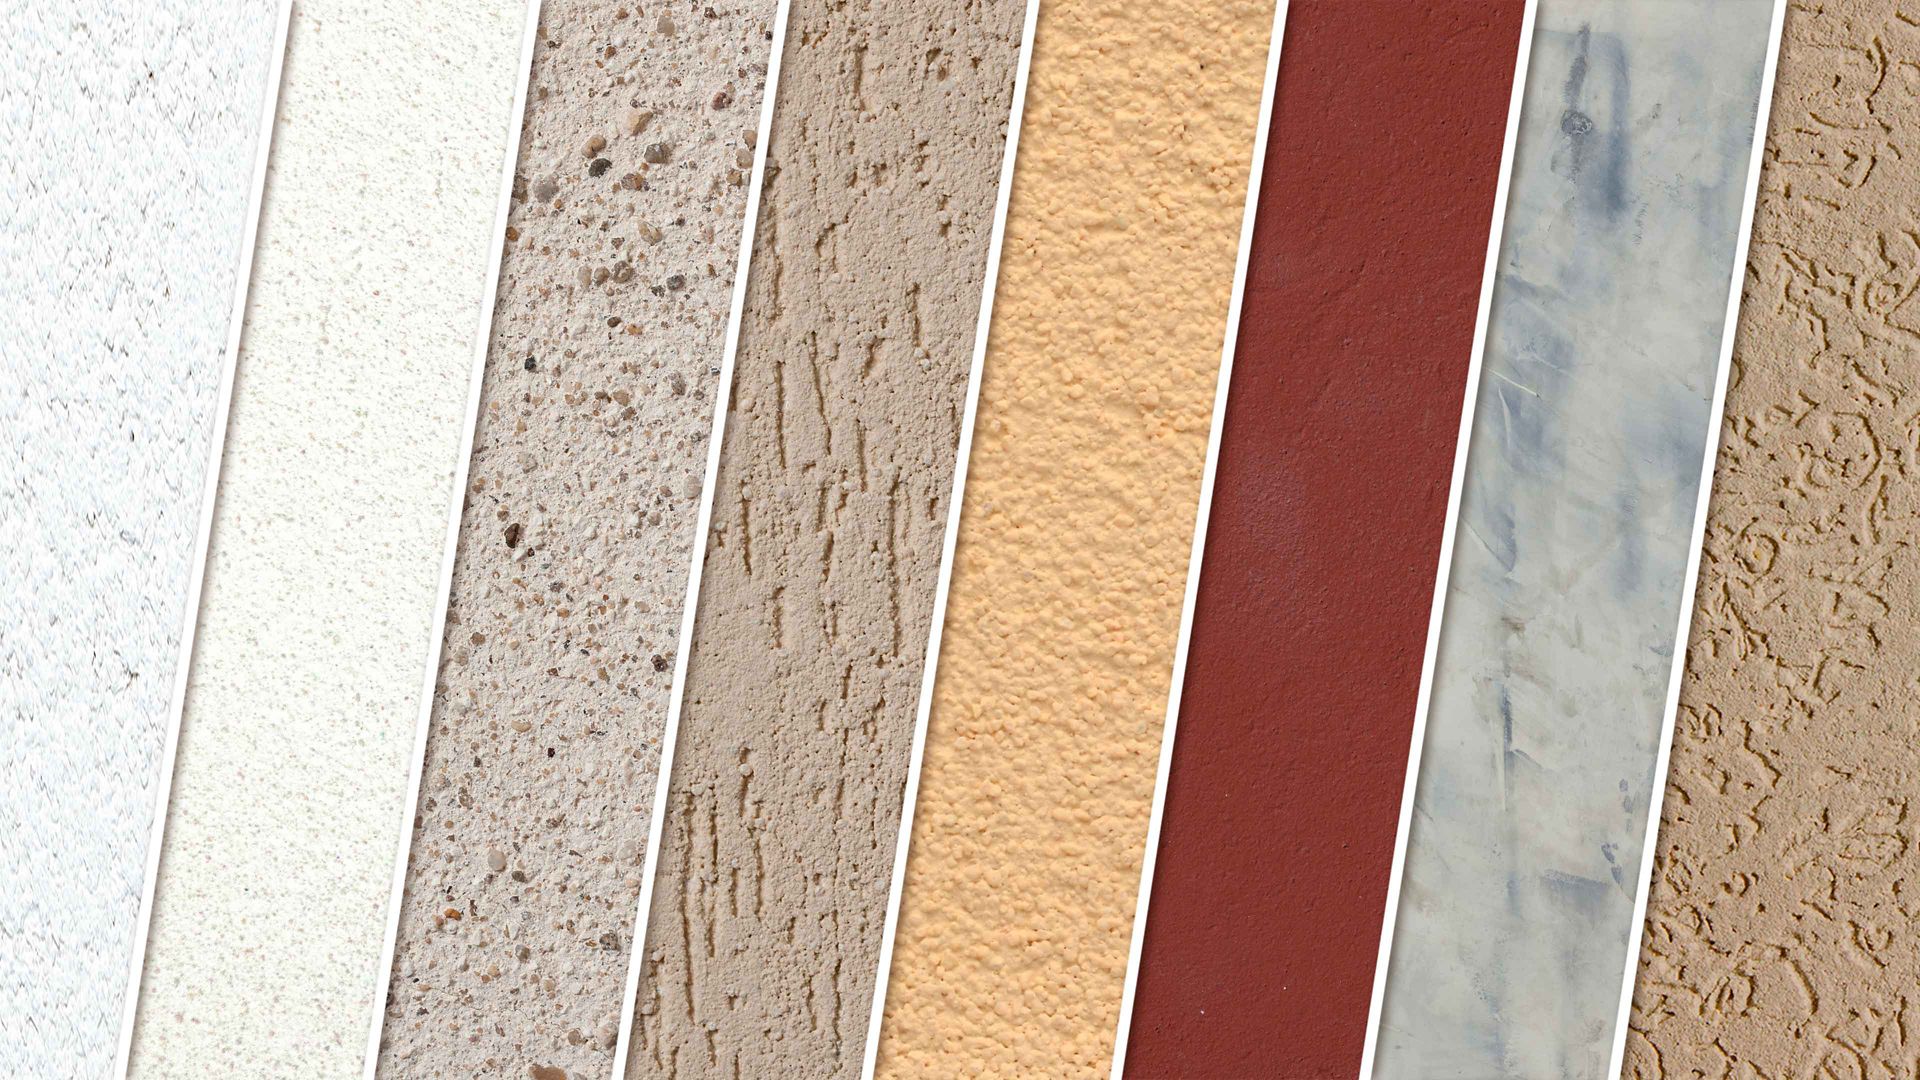 Palette of color texture finish options for facade finishing